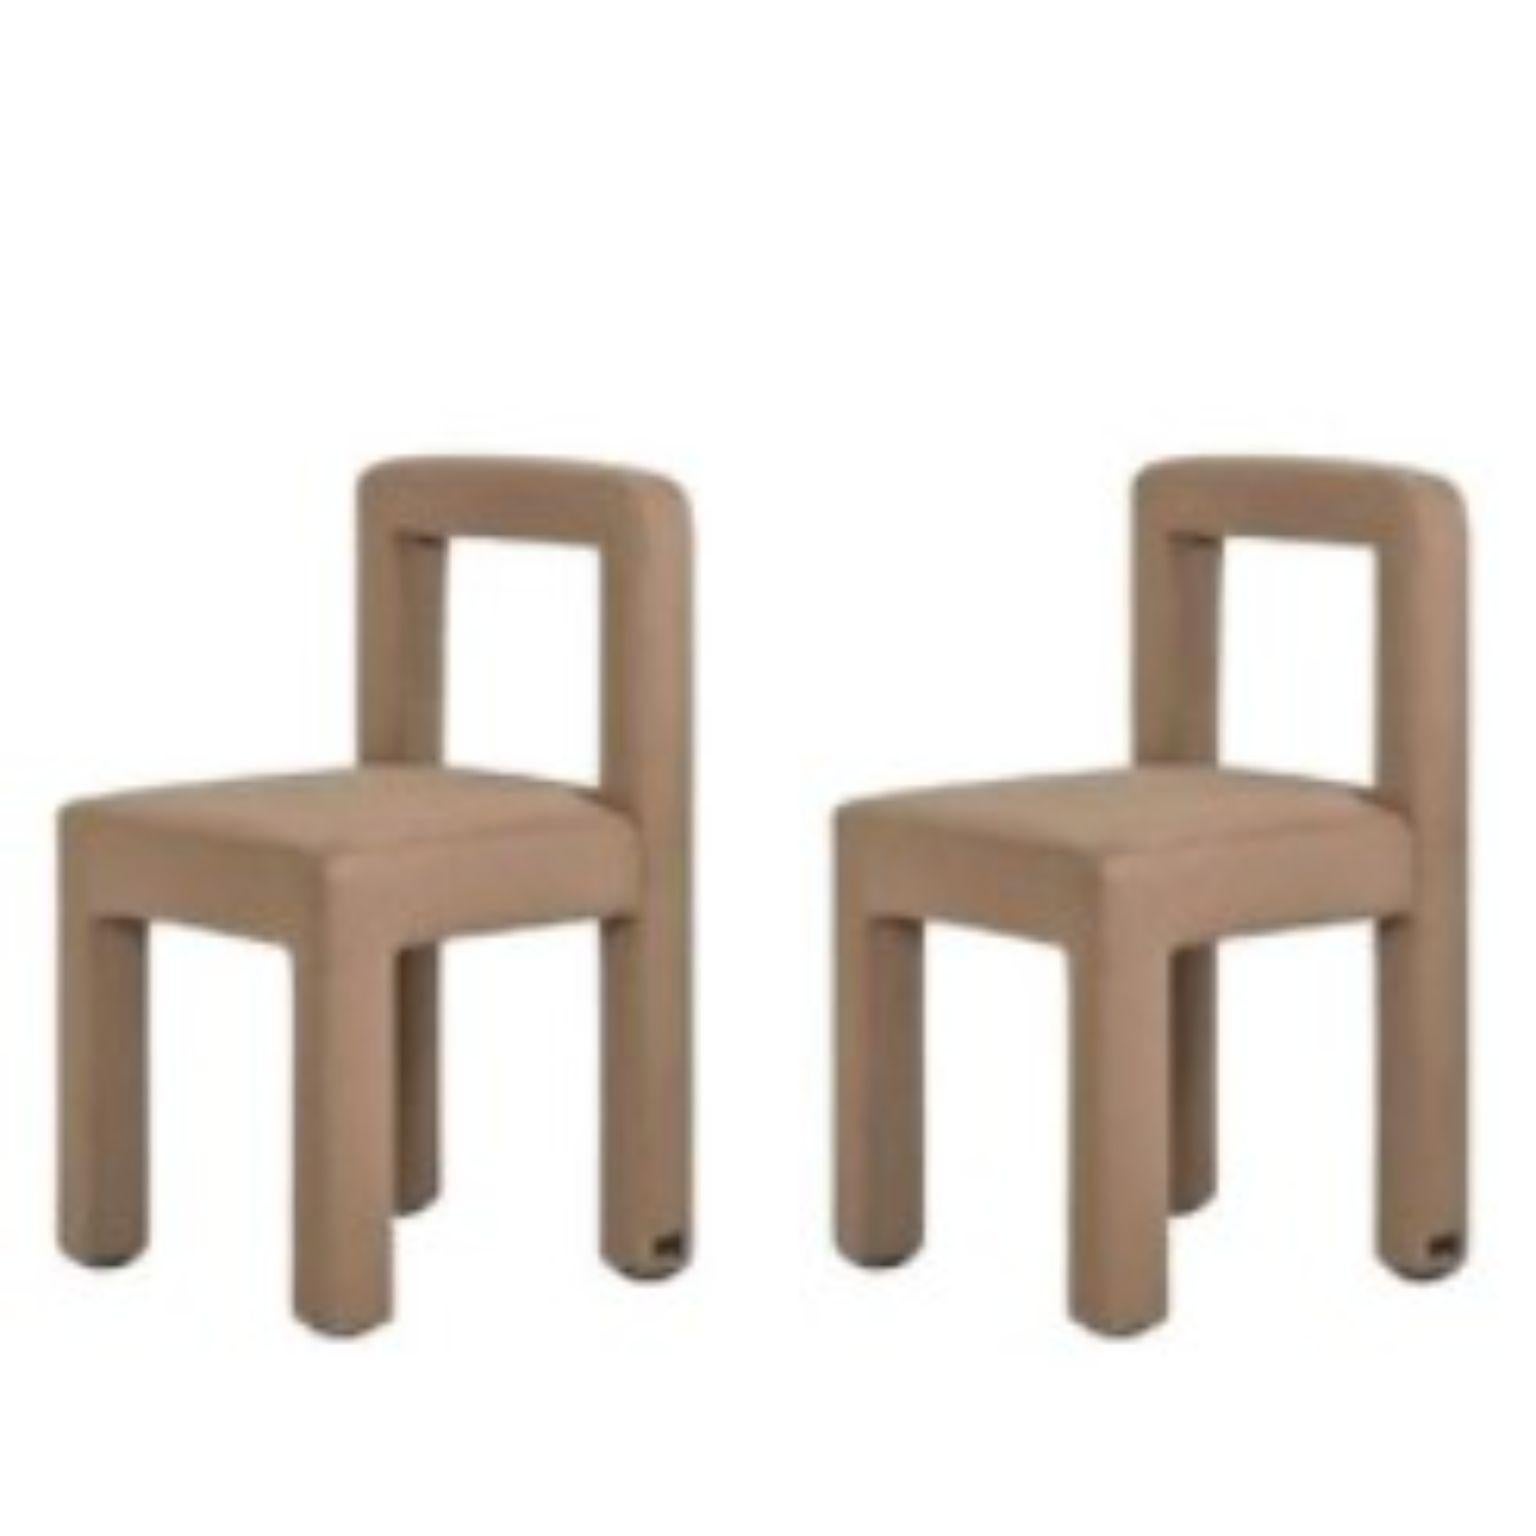 Set of 2 Toptun chairs by FAINA
Design: Victoriya Yakusha
Material: Textiles, Foam rubber, Sintepon, Wood
Dimensions: height: 78 x front width: 46 x side width: 48 cm
 Weight: 12,1 kilos.
(Also available in longer version 240 cm width)

Made